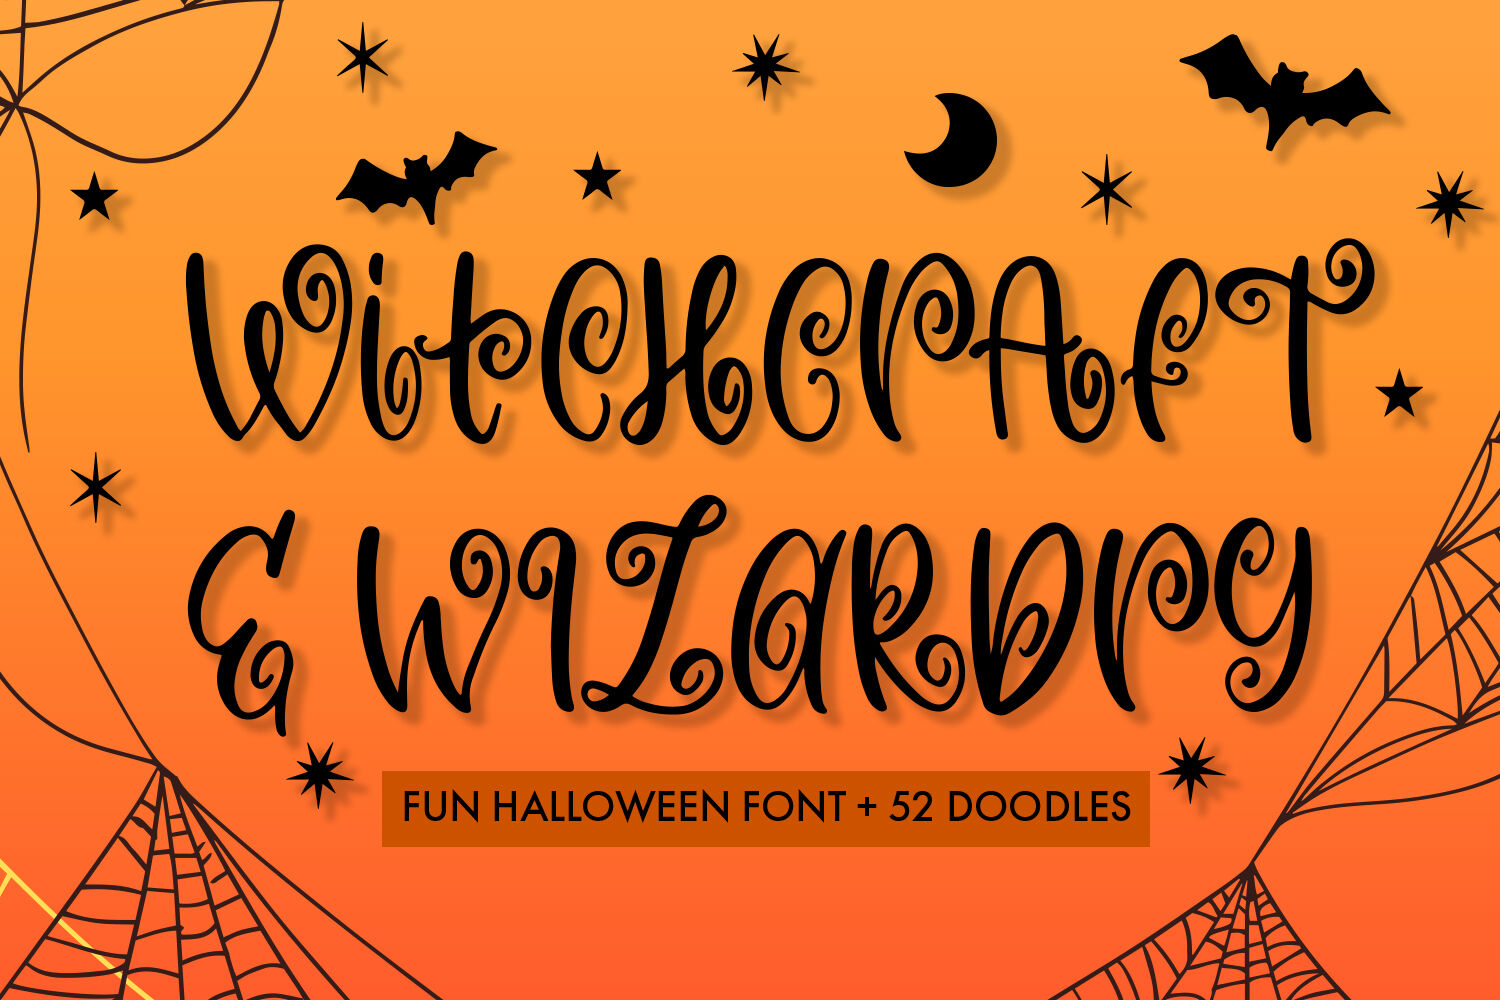 Witchcraft And Wizardry A Fun Halloween Font With Doodles By Freeling Design House Thehungryjpeg Com